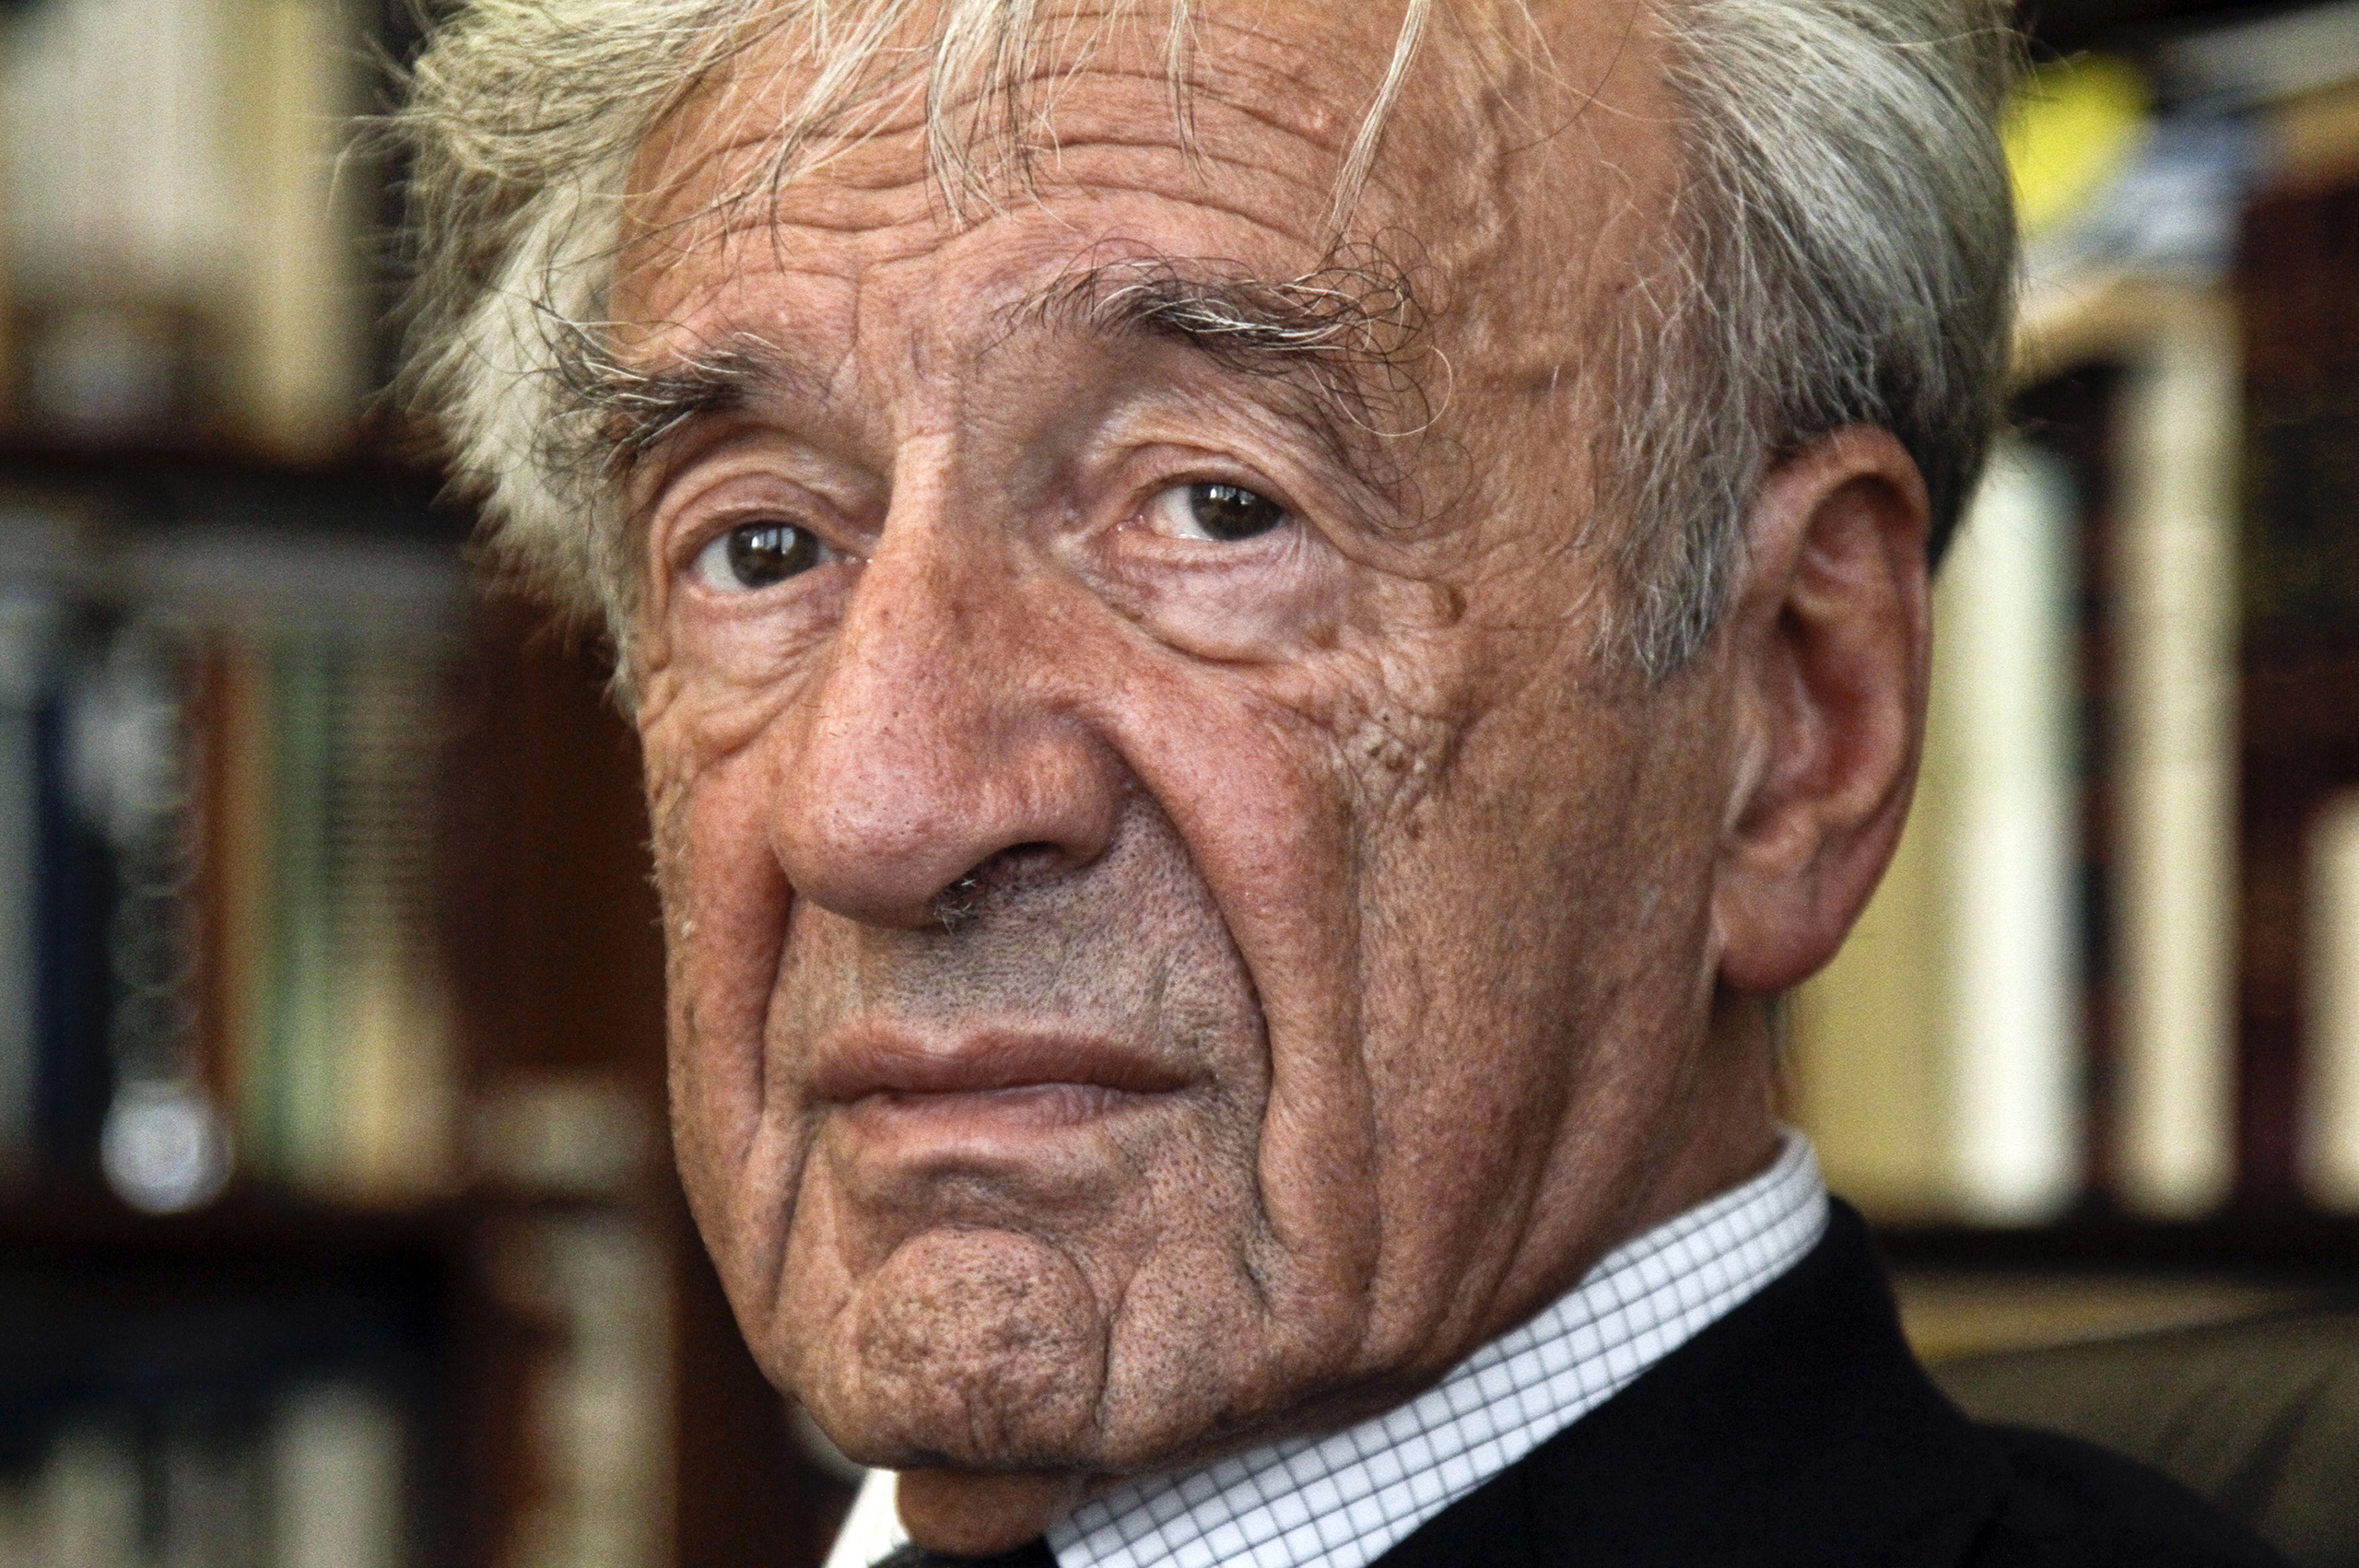 This Sept. 12, 2012, photo shows Holocaust activist and Nobel Peace Prize recipient Elie Wiesel, 83, in his office in New York. (Bebeto Matthews—AP)